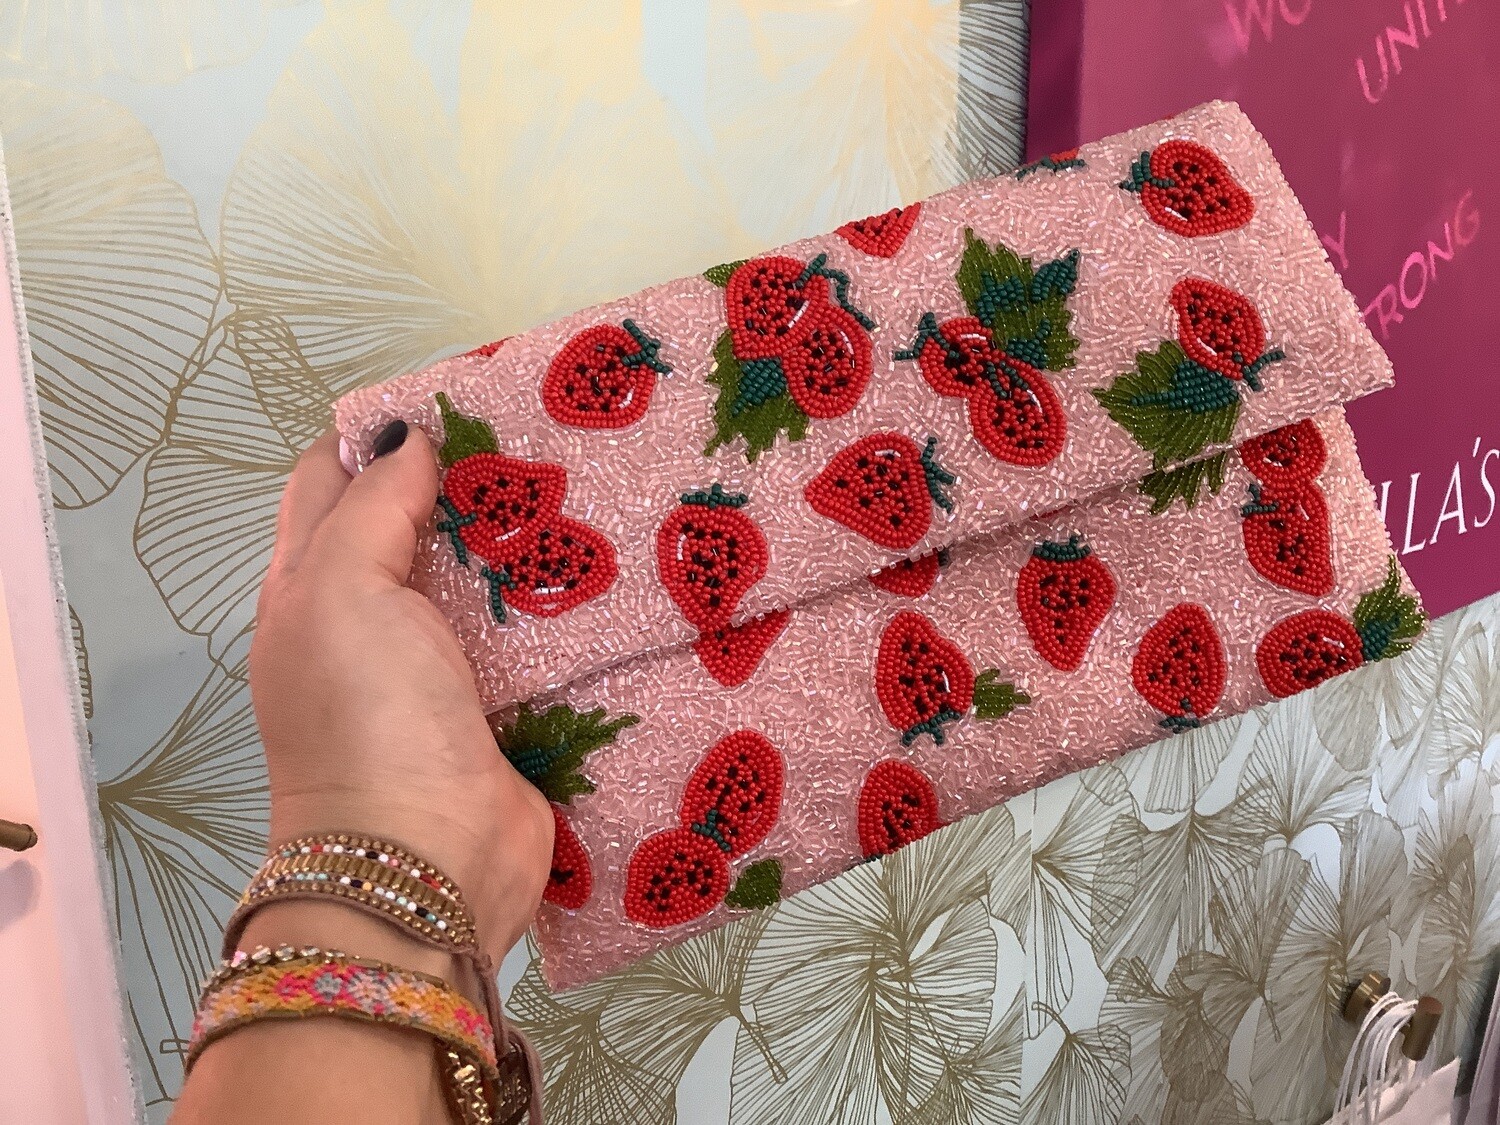 Hand-beaded pink strawberry clutch